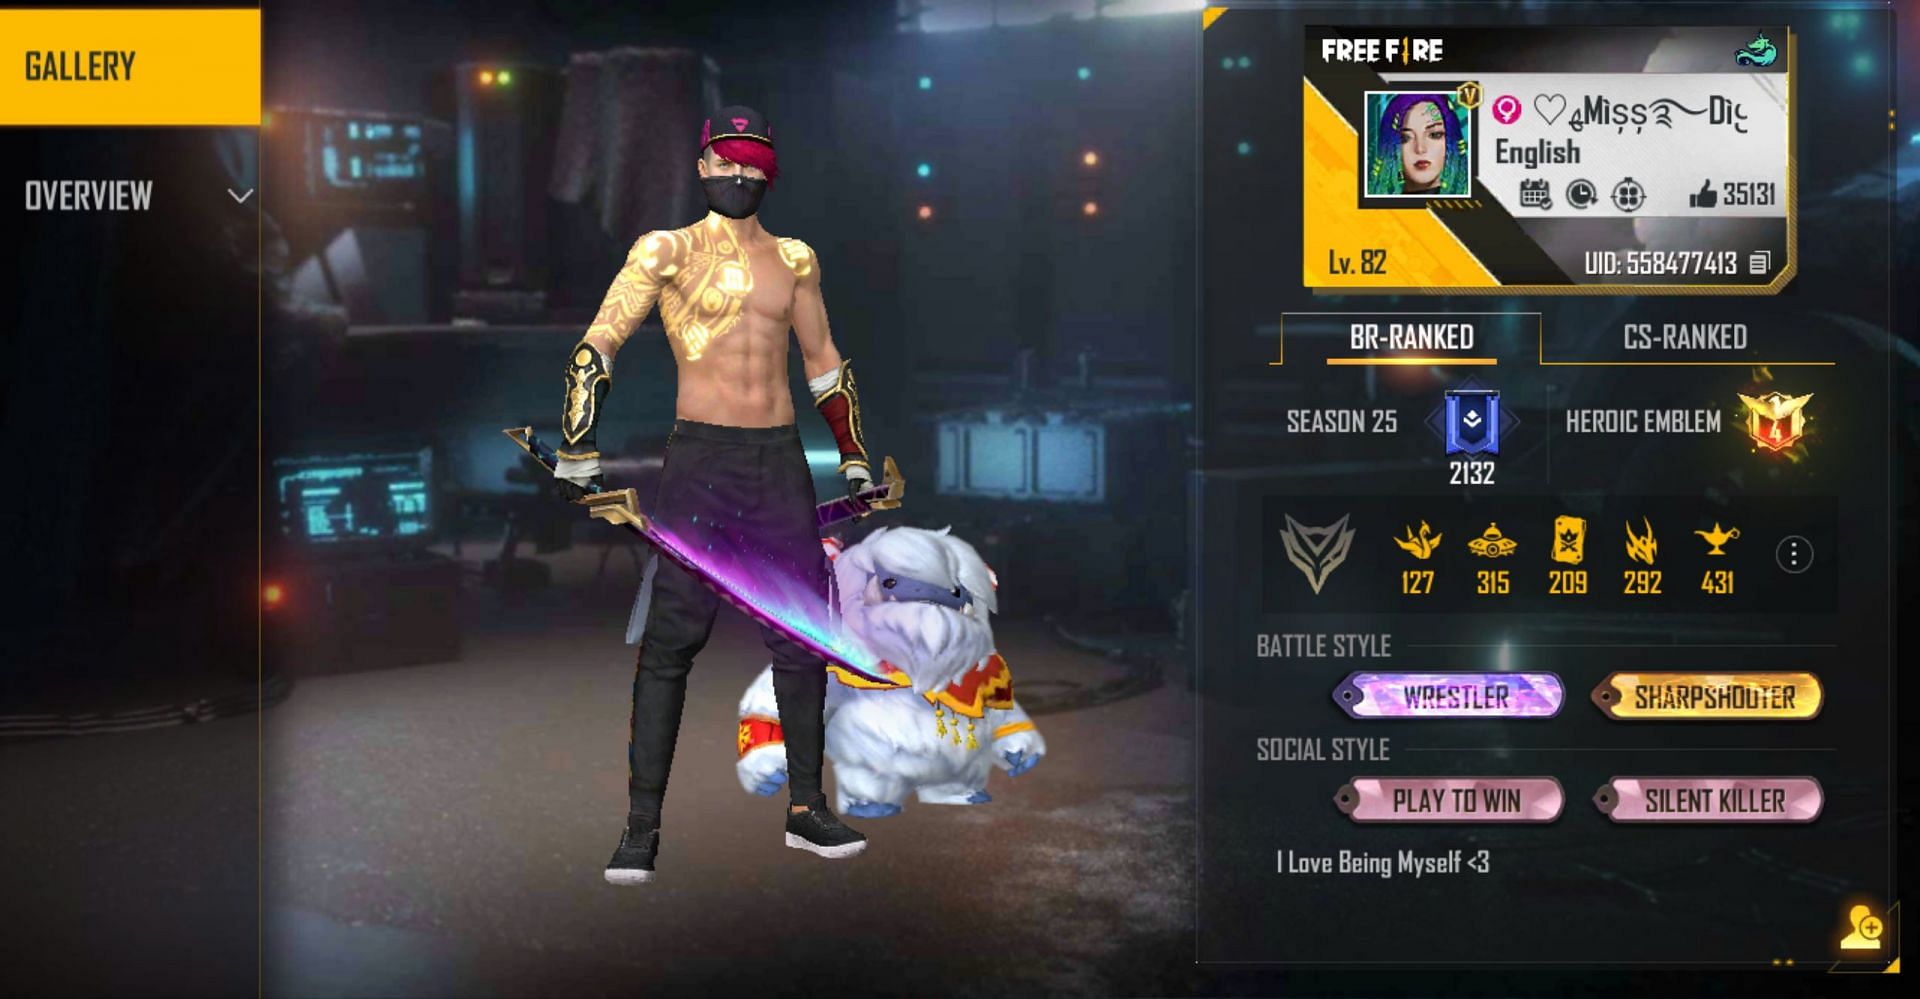 This is the Free Fire ID of BlackPink Gaming (Image via Garena)